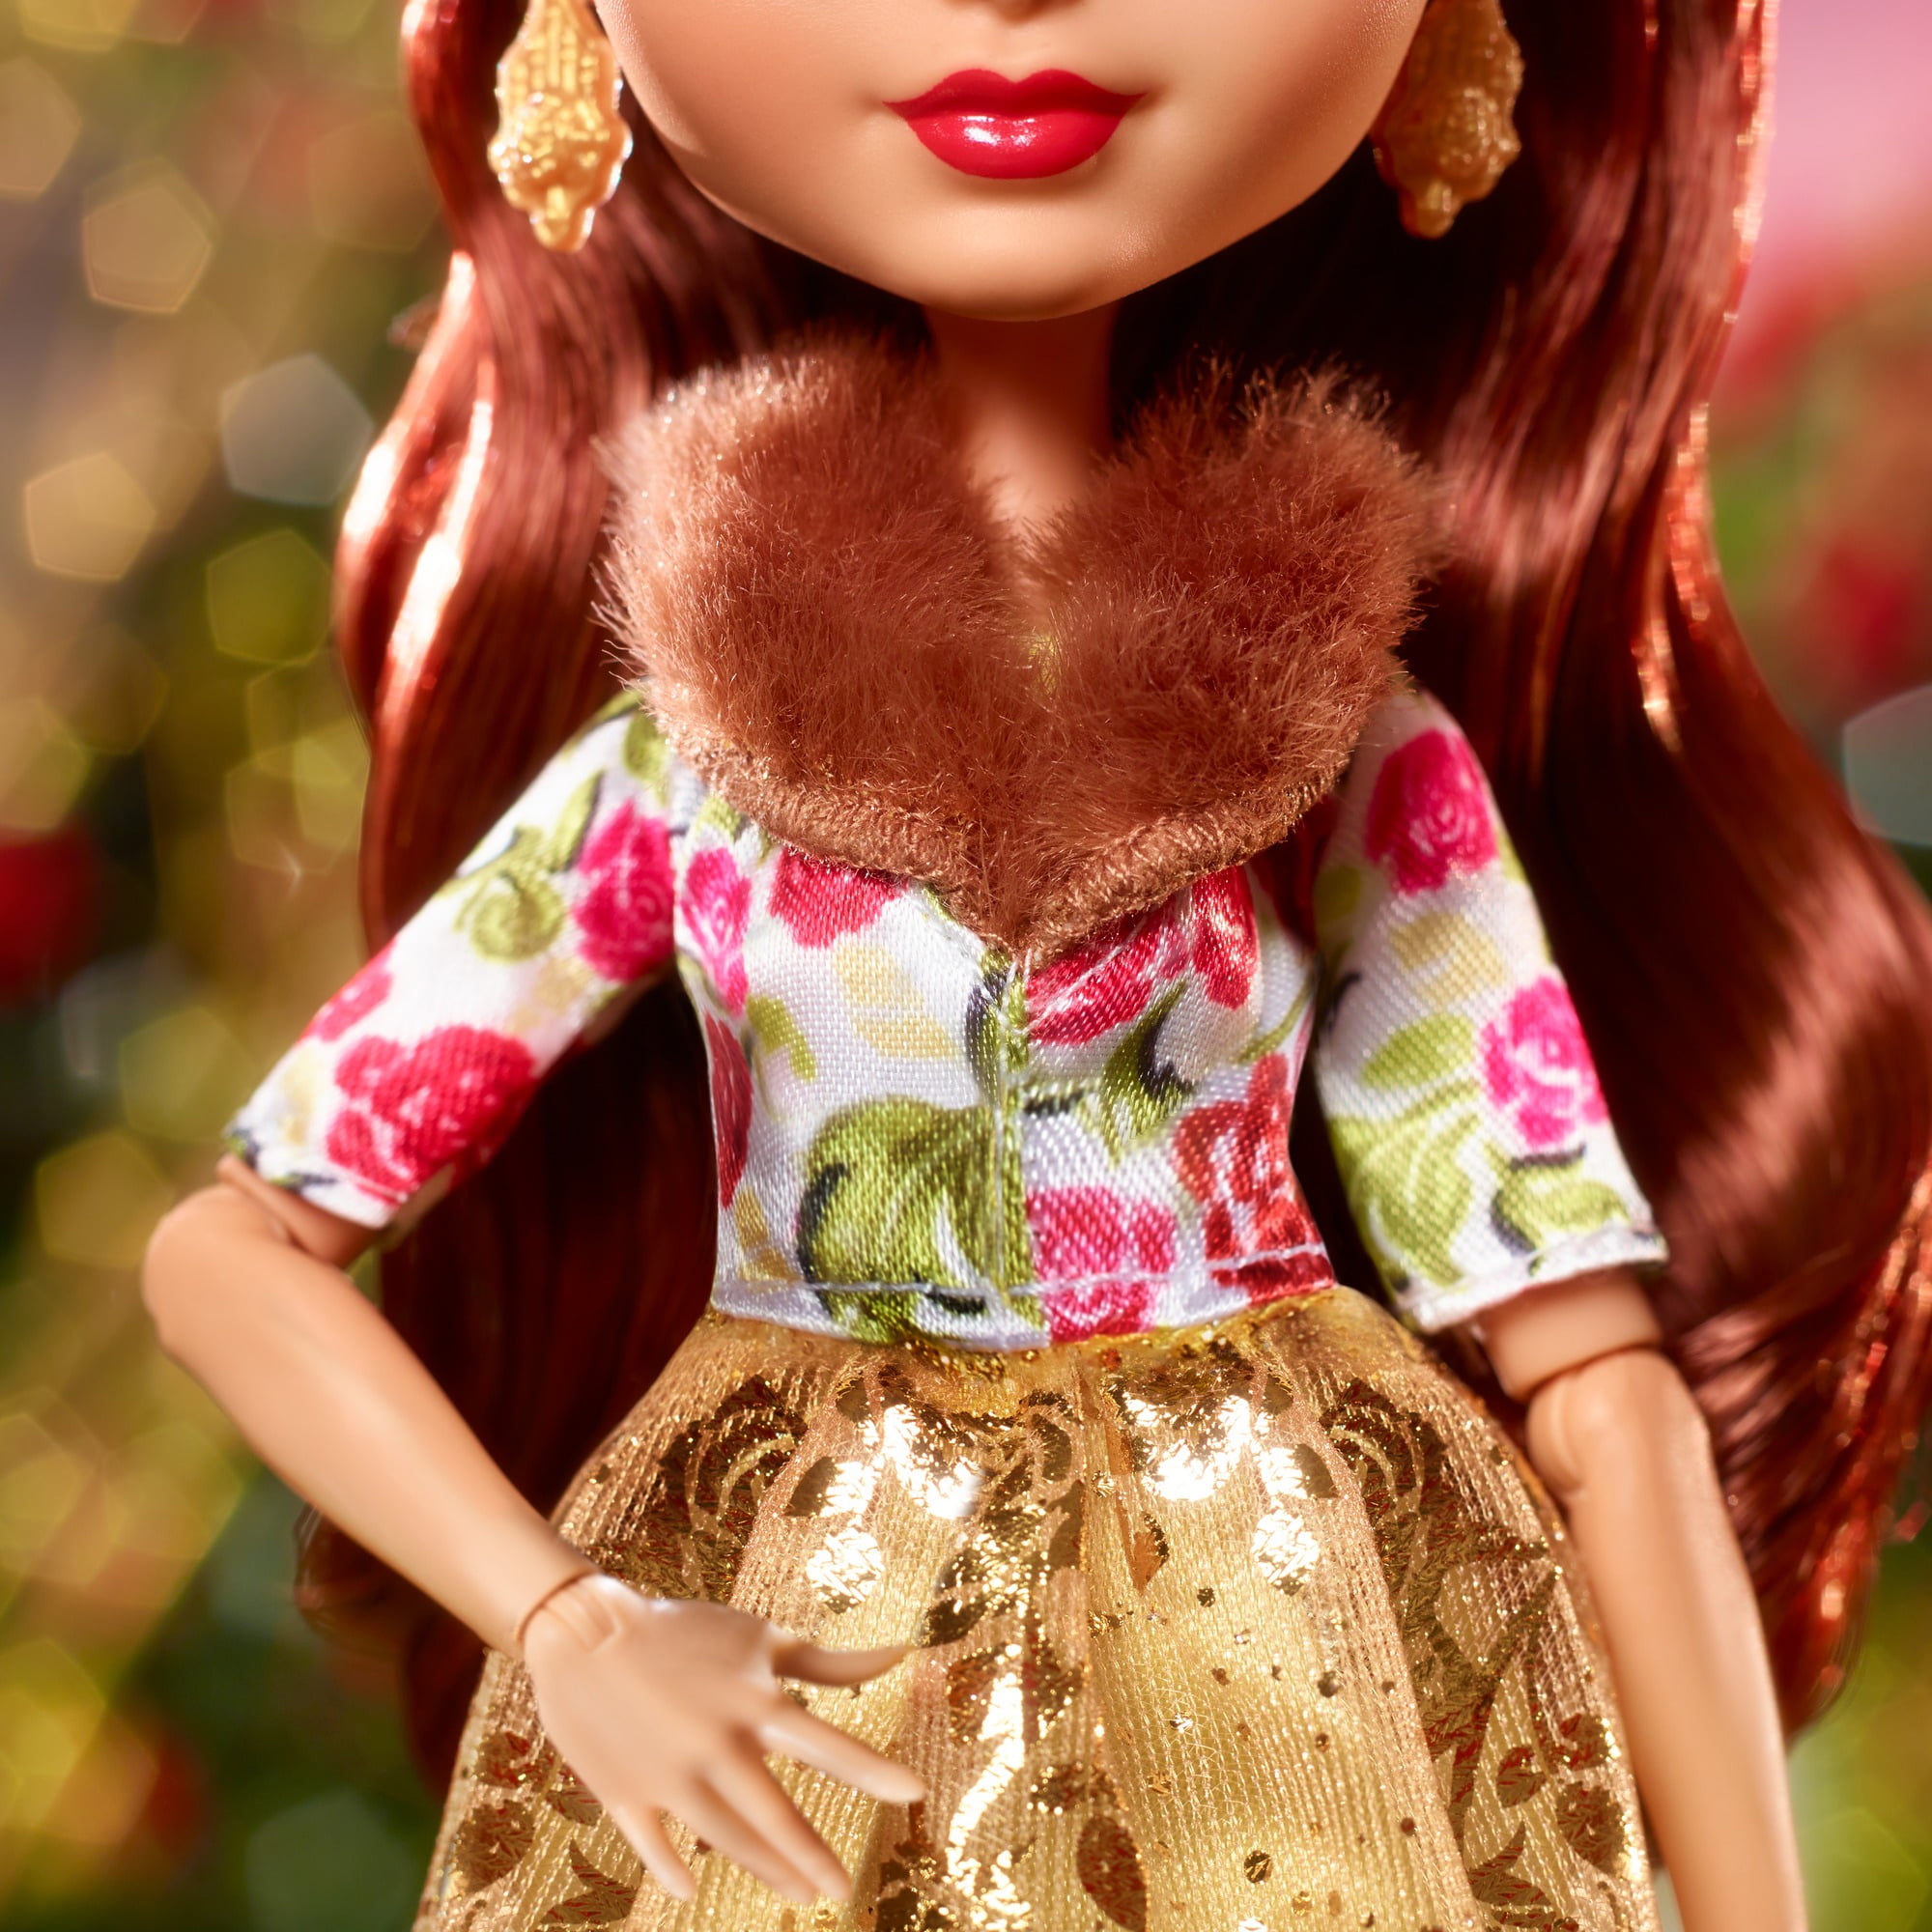 Ever After High Dolls - Rosabella Beauty™ (Daughter of Beauty